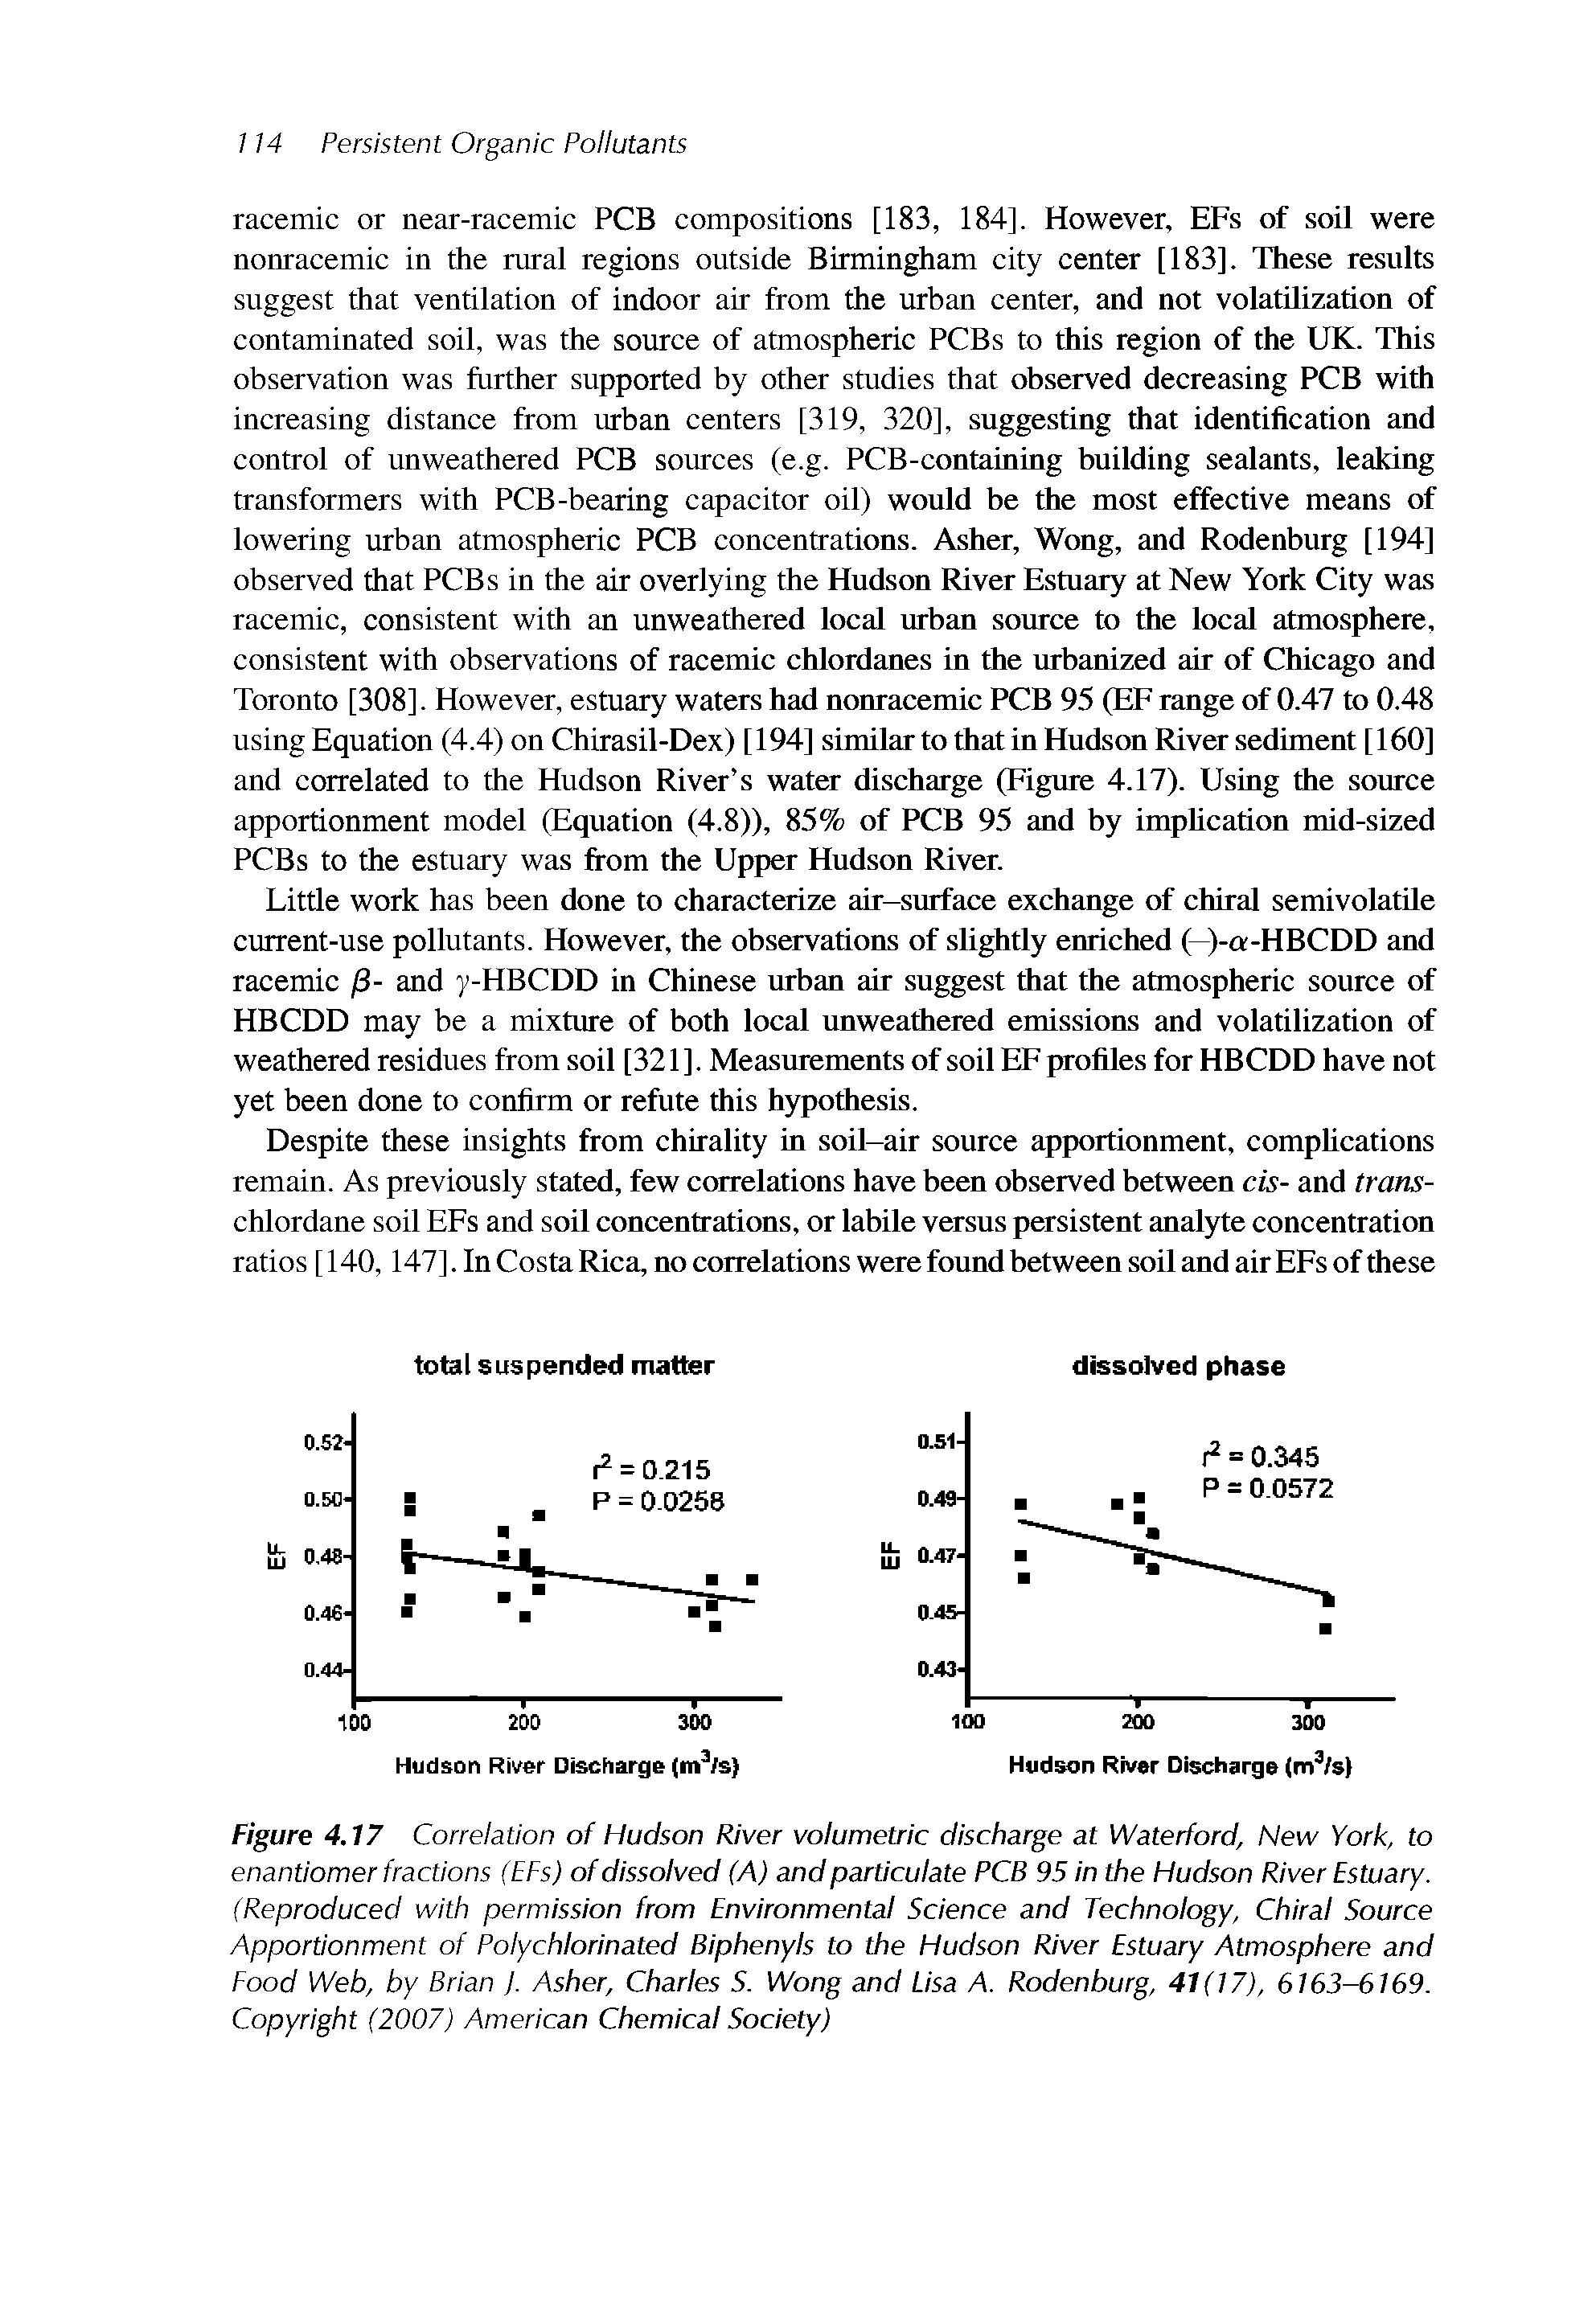 Figure 4.17 Correlation of Hudson River volumetric discharge at Waterford, New York, to enantiomer fractions (EFs) of dissolved (A) and particulate PCB 95 In the Hudson River Estuary. (Reproduced with permission from Environmental Science and Technology, Chiral Source Apportionment of Polychlorinated Biphenyls to the Hudson River Estuary Atmosphere and Food Web, by Brian j. Asher, Charles S. Wong and Lisa A. Rodenburg, 41(17), 6163-6169. Copyright (2007) American Chemical Society)...